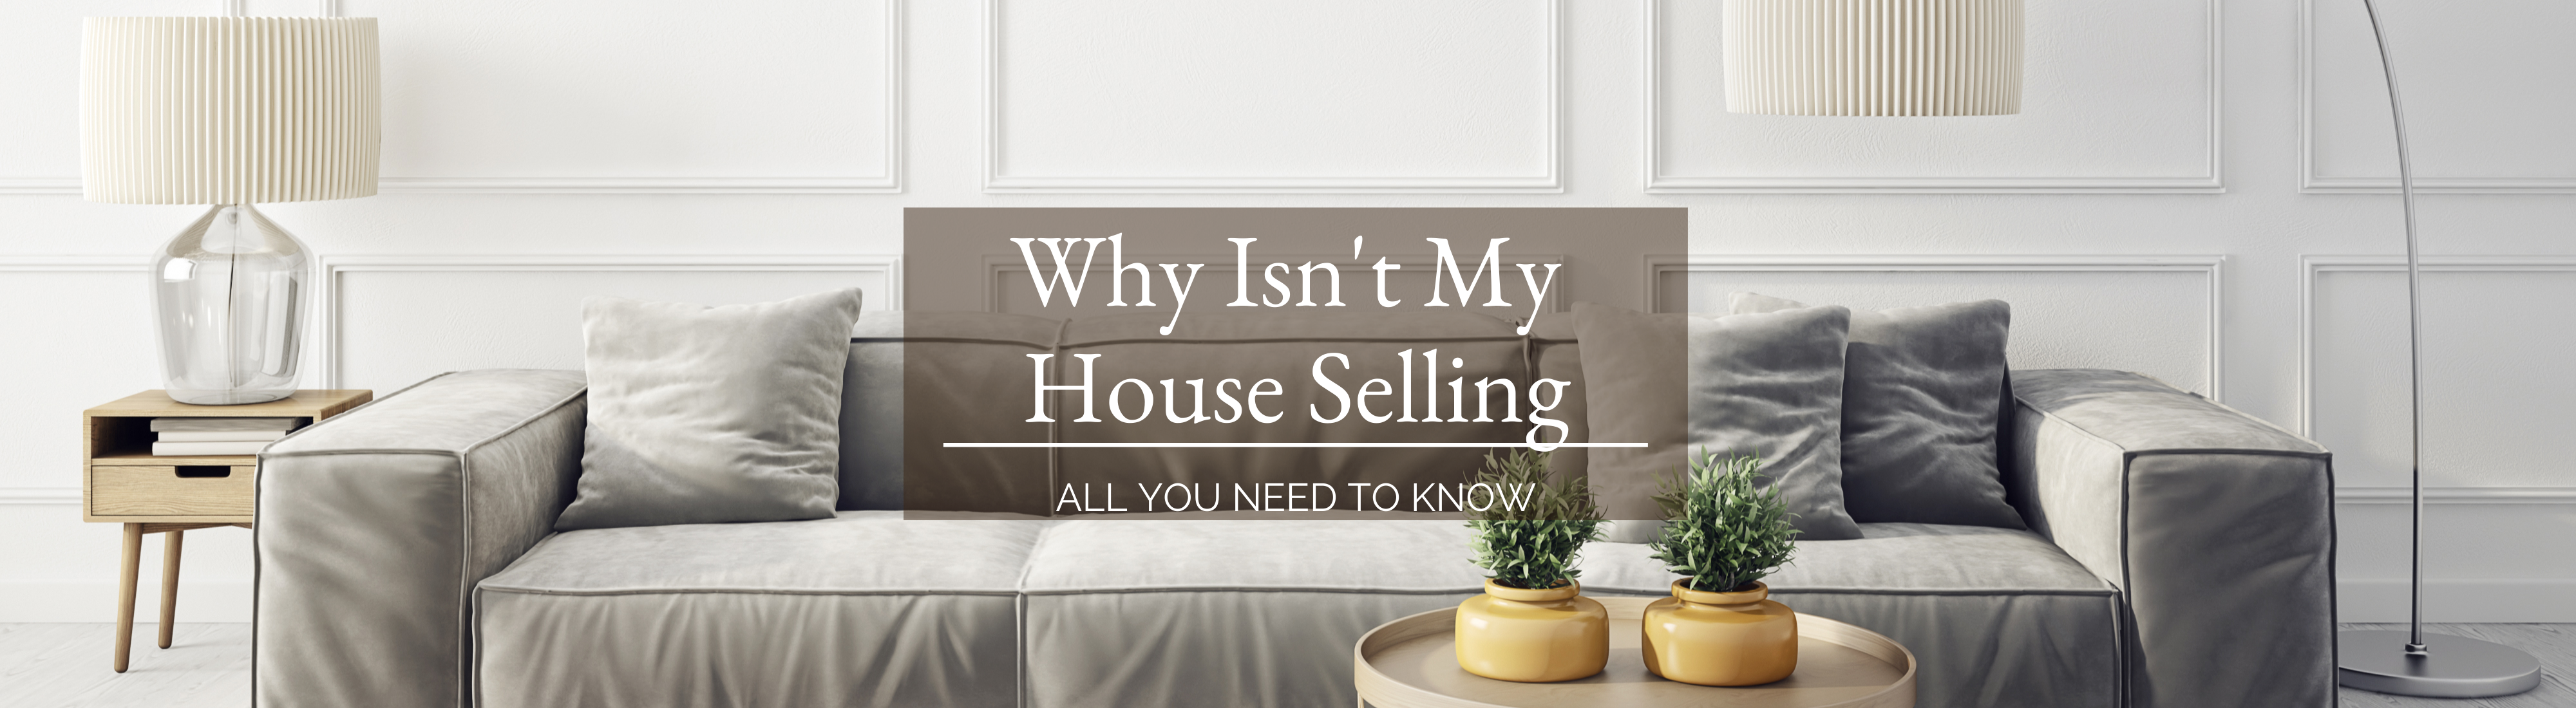 why_isnt_my_house_selling